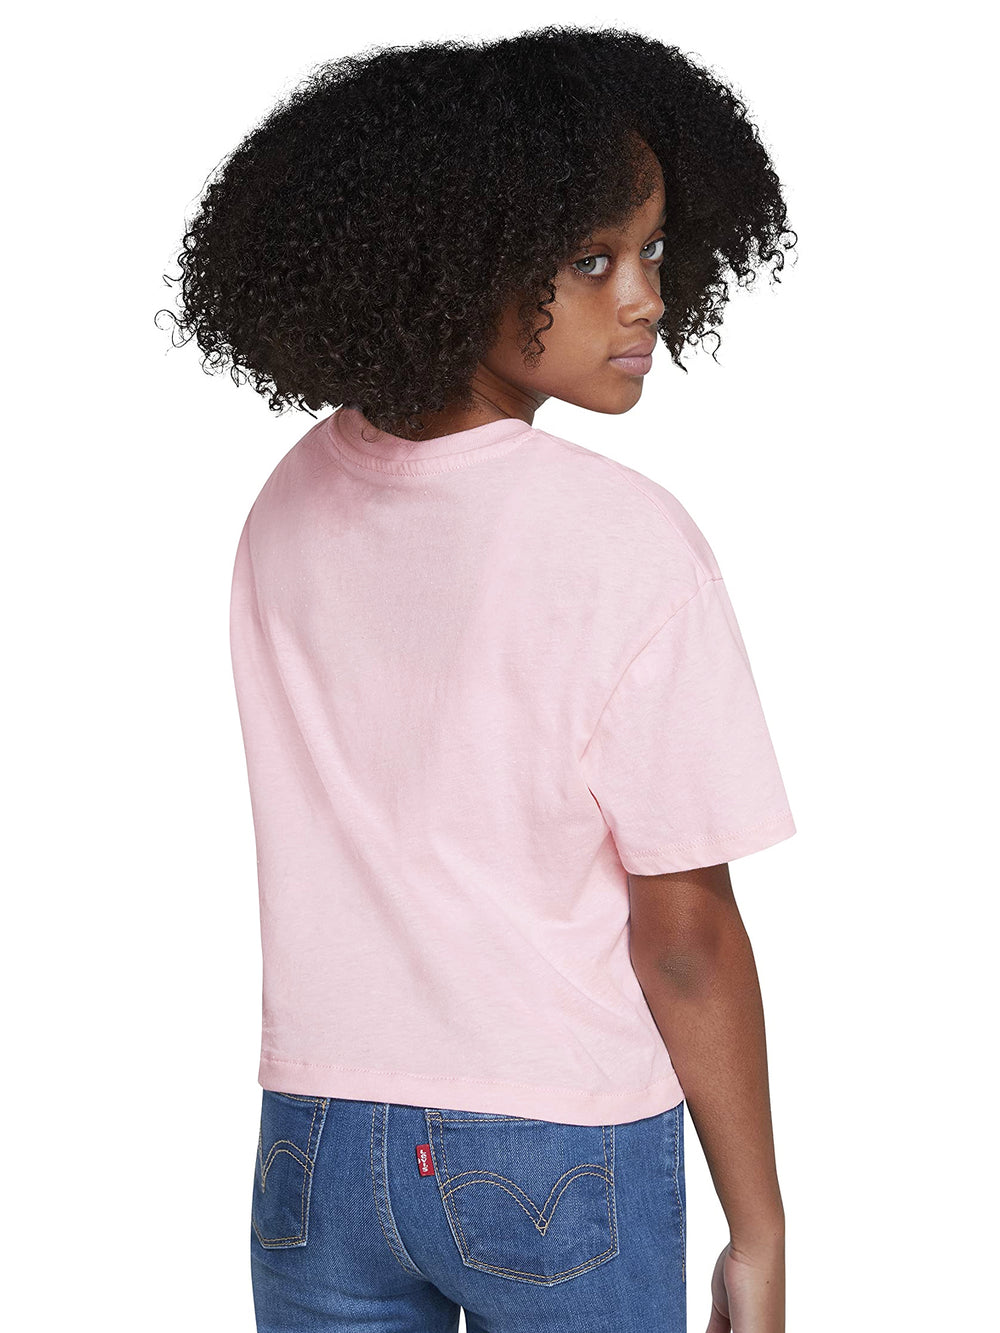 KIDS LEVIS YOUTH GIRLS HIGH RISE T-SHIRT - CLEARANCE